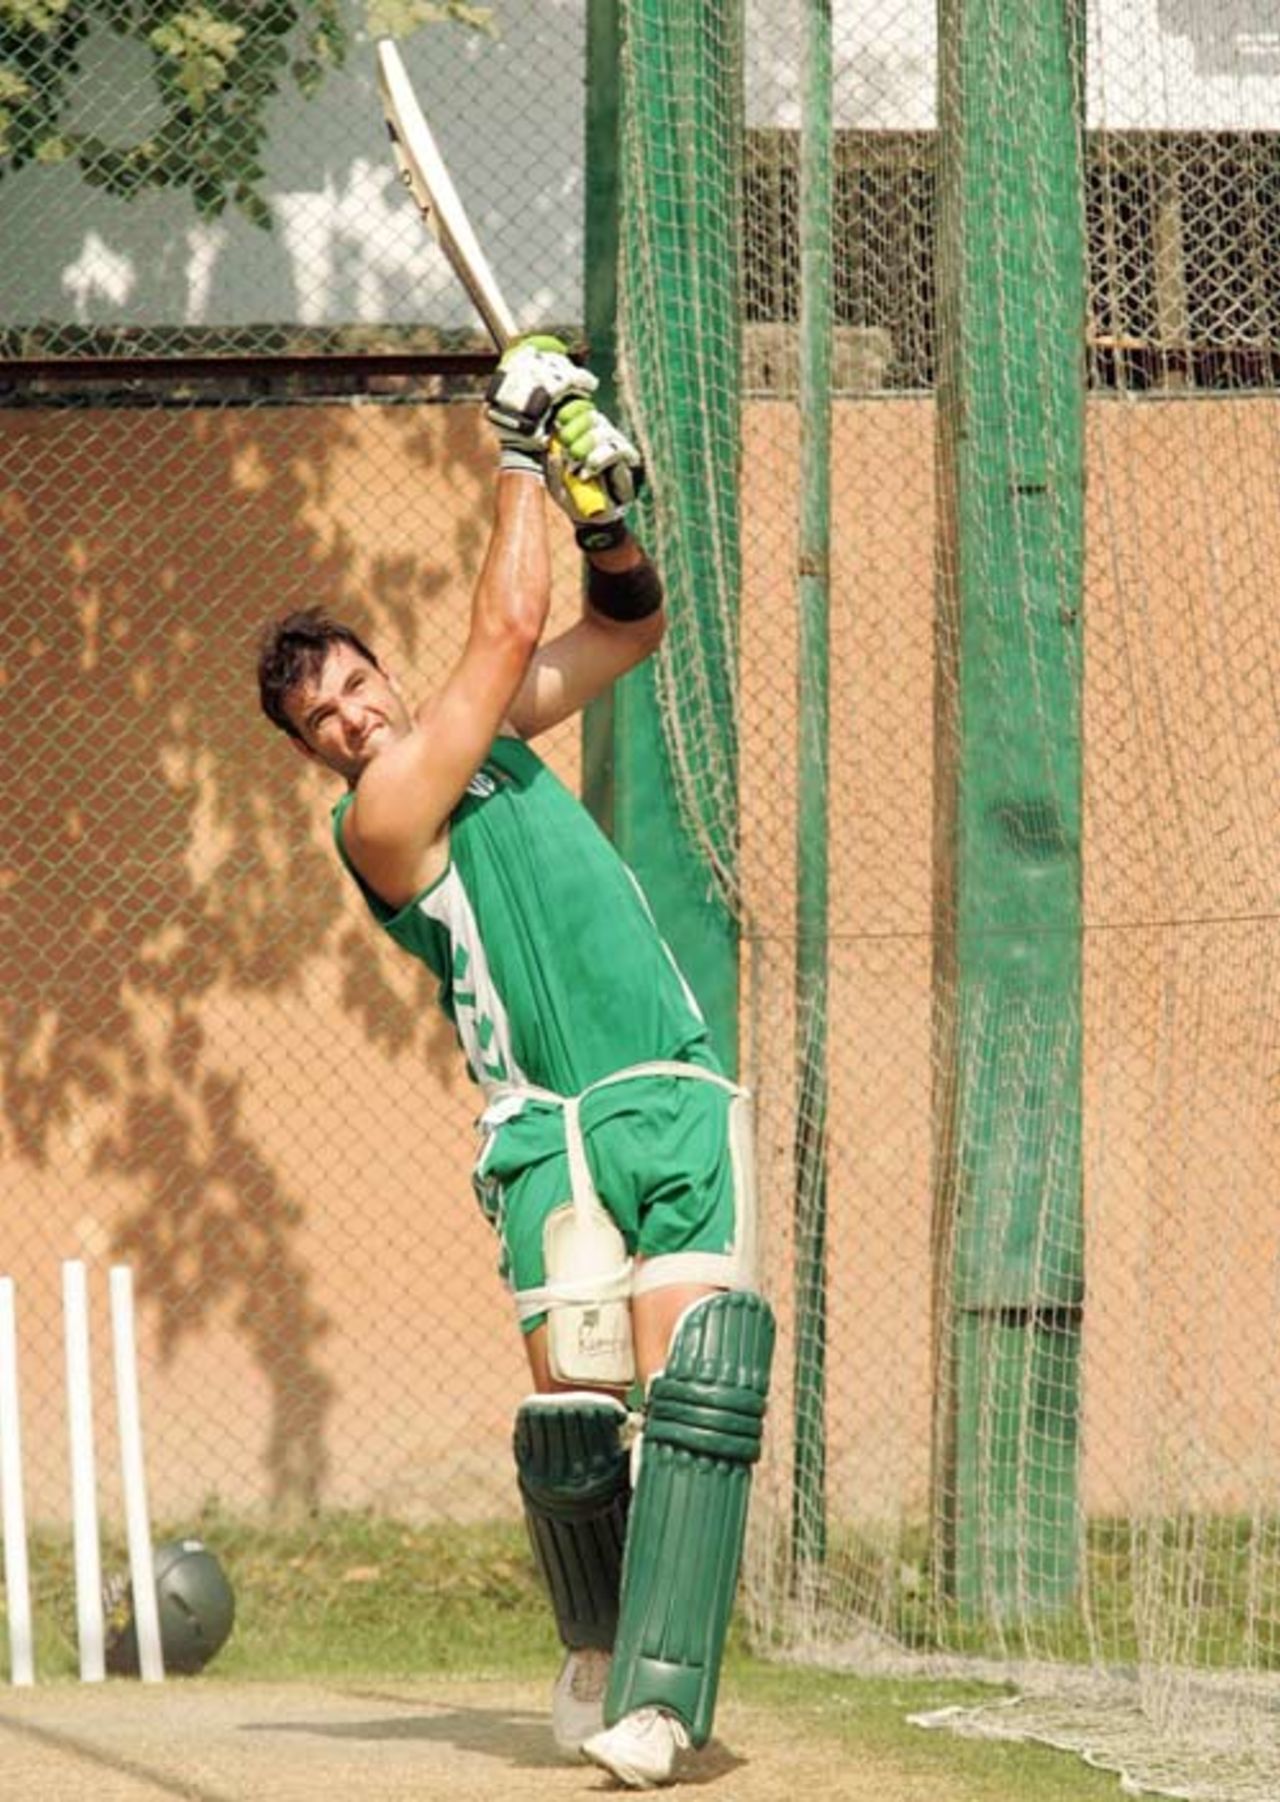 Justin Kemp lofts the ball during practice, Lahore, October 15, 2007 